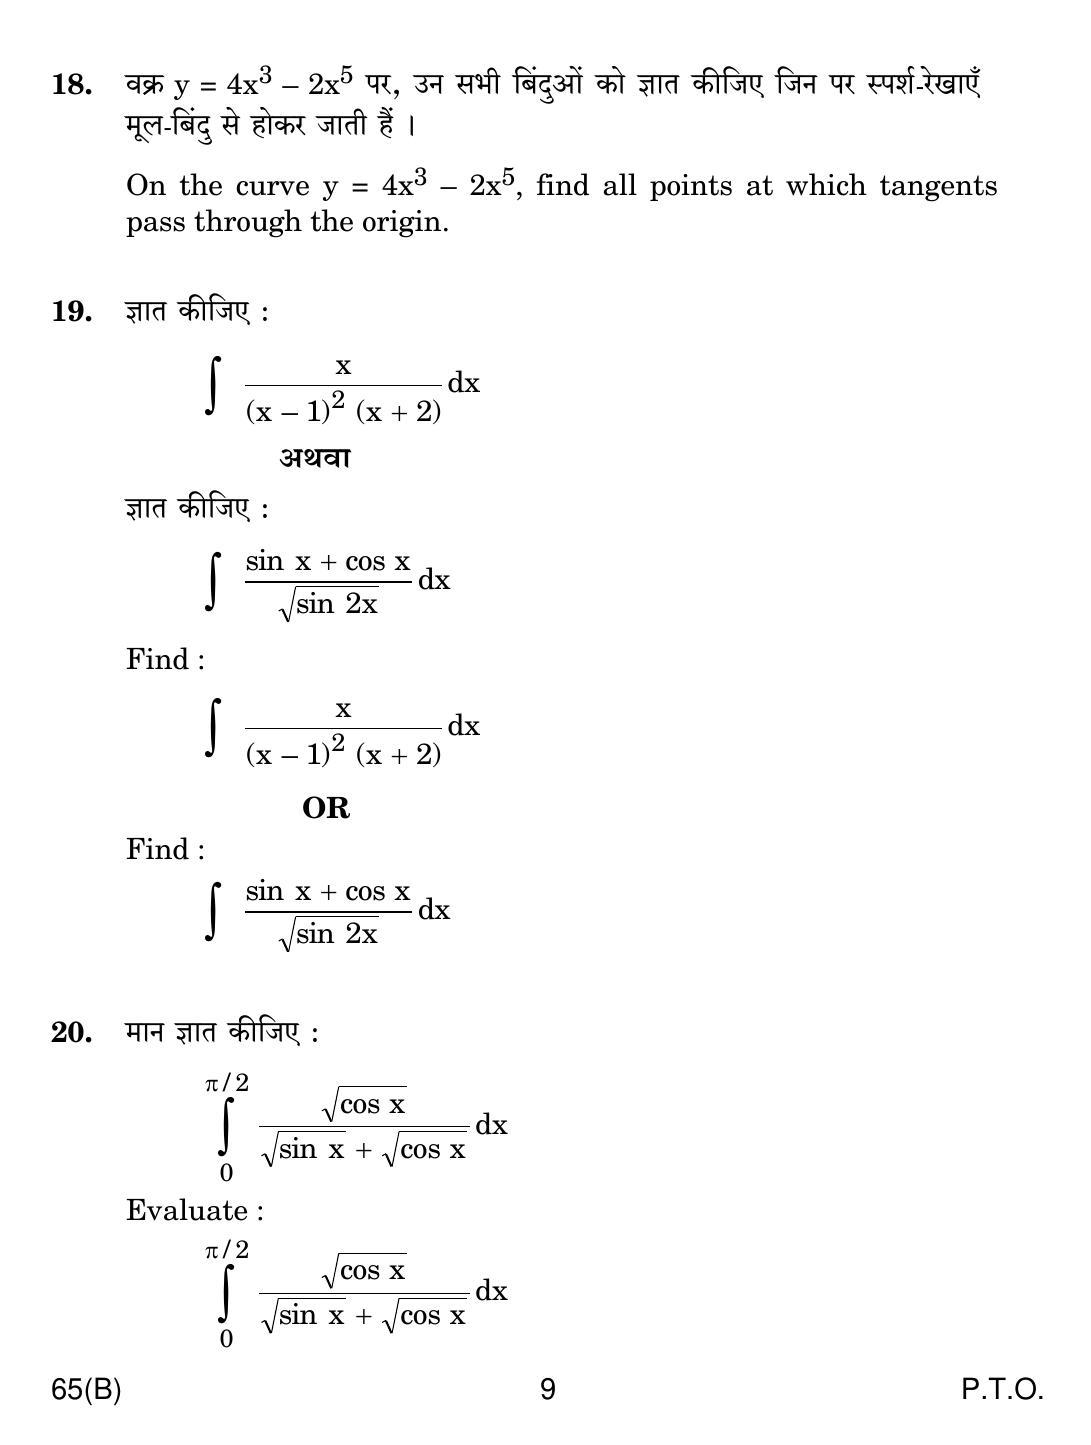 CBSE Class 12 65(B) MATHS For Blind Candidates 2019 Compartment Question Paper - Page 9